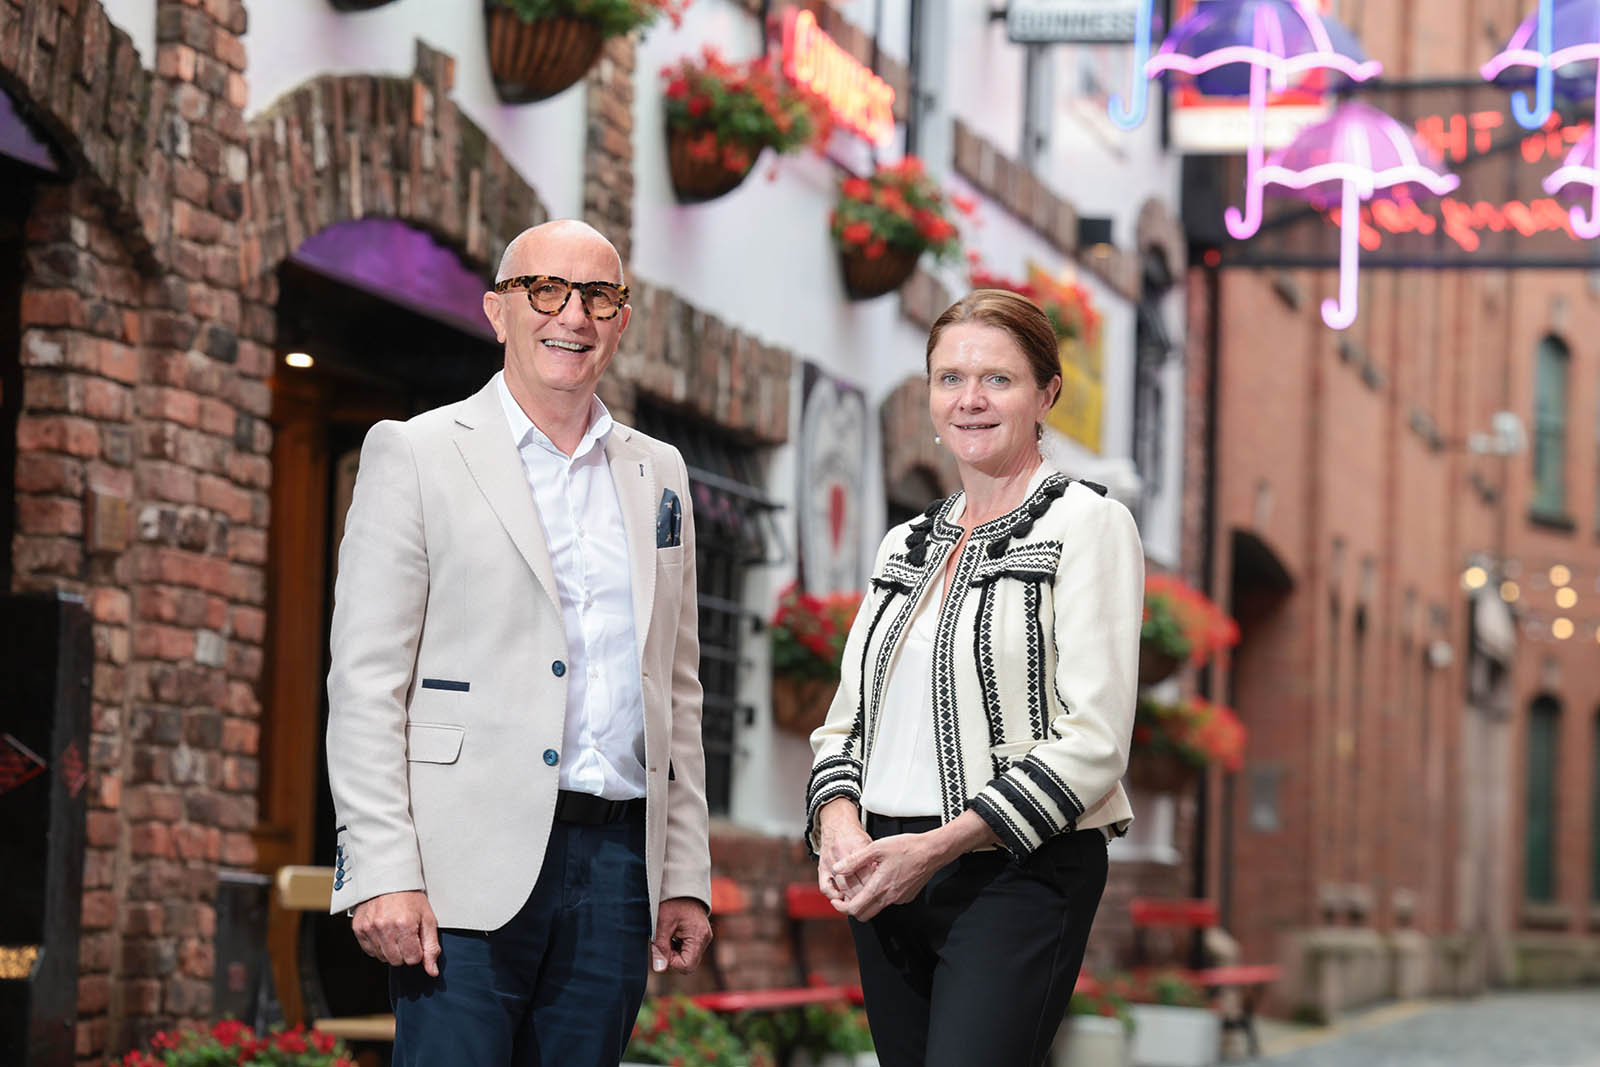 HOSPITALITY INDUSTRY URGES NEW NI FINANCE MINISTER AND CHANCELLOR TO BACK THE HOSPITALITY SECTOR